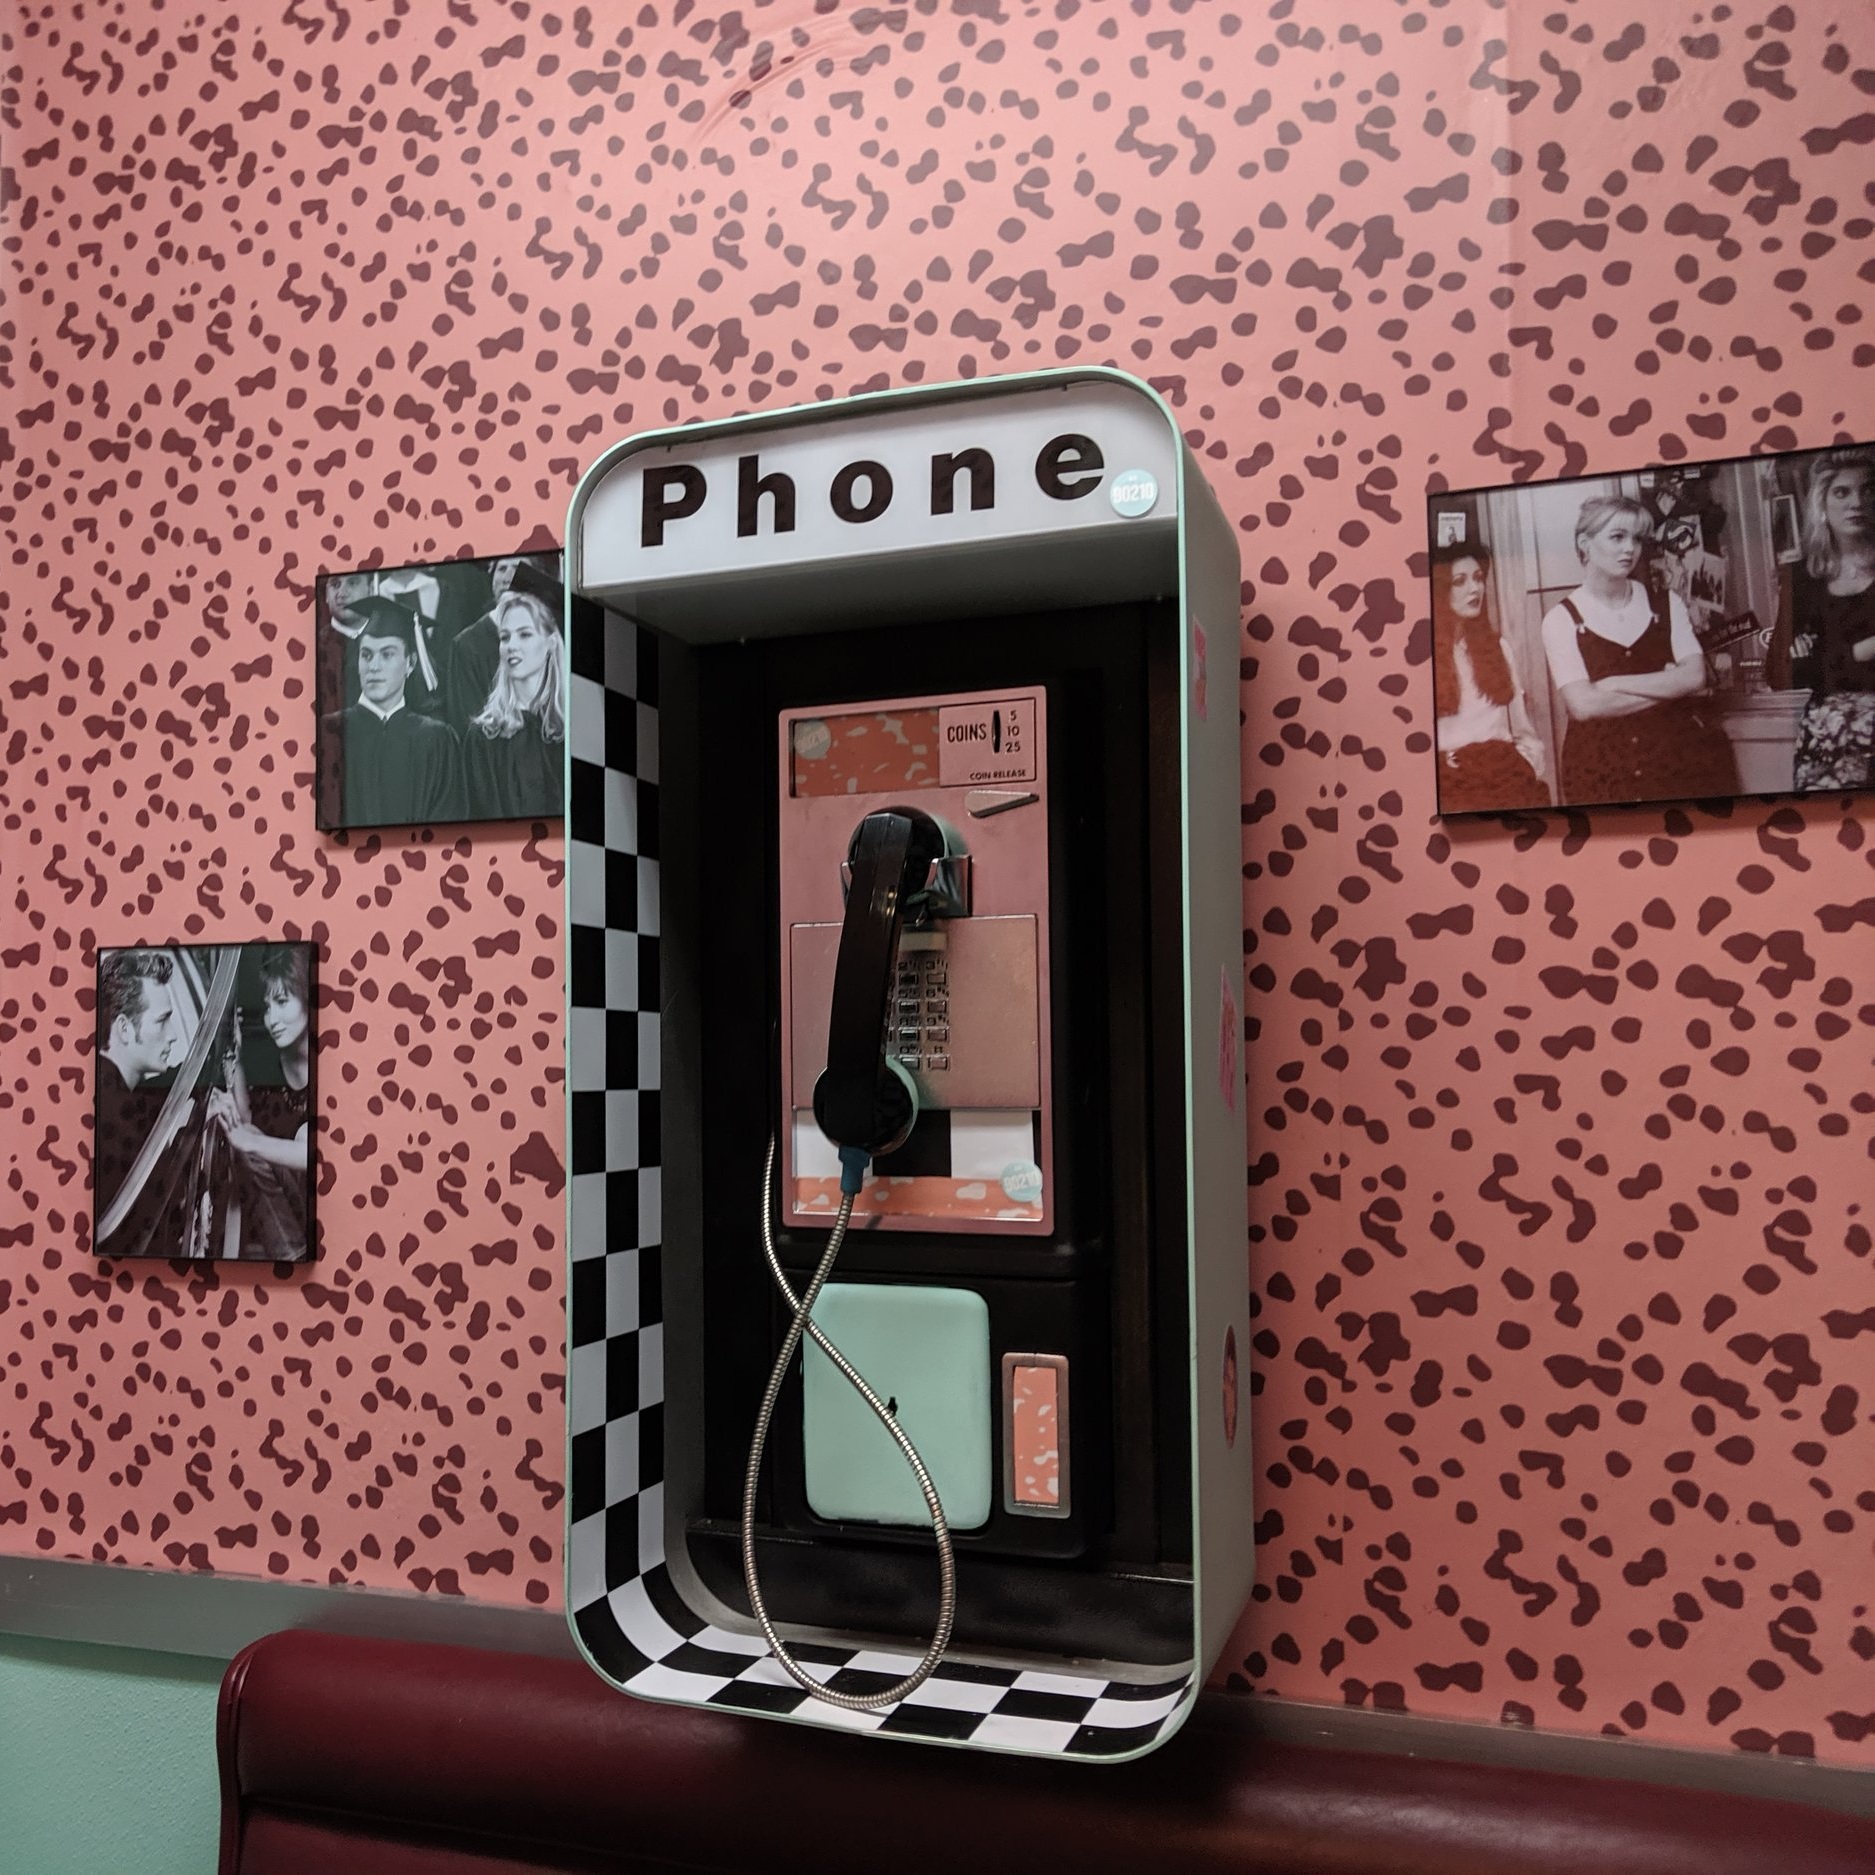 Kind of need a checkerboard wall phone!